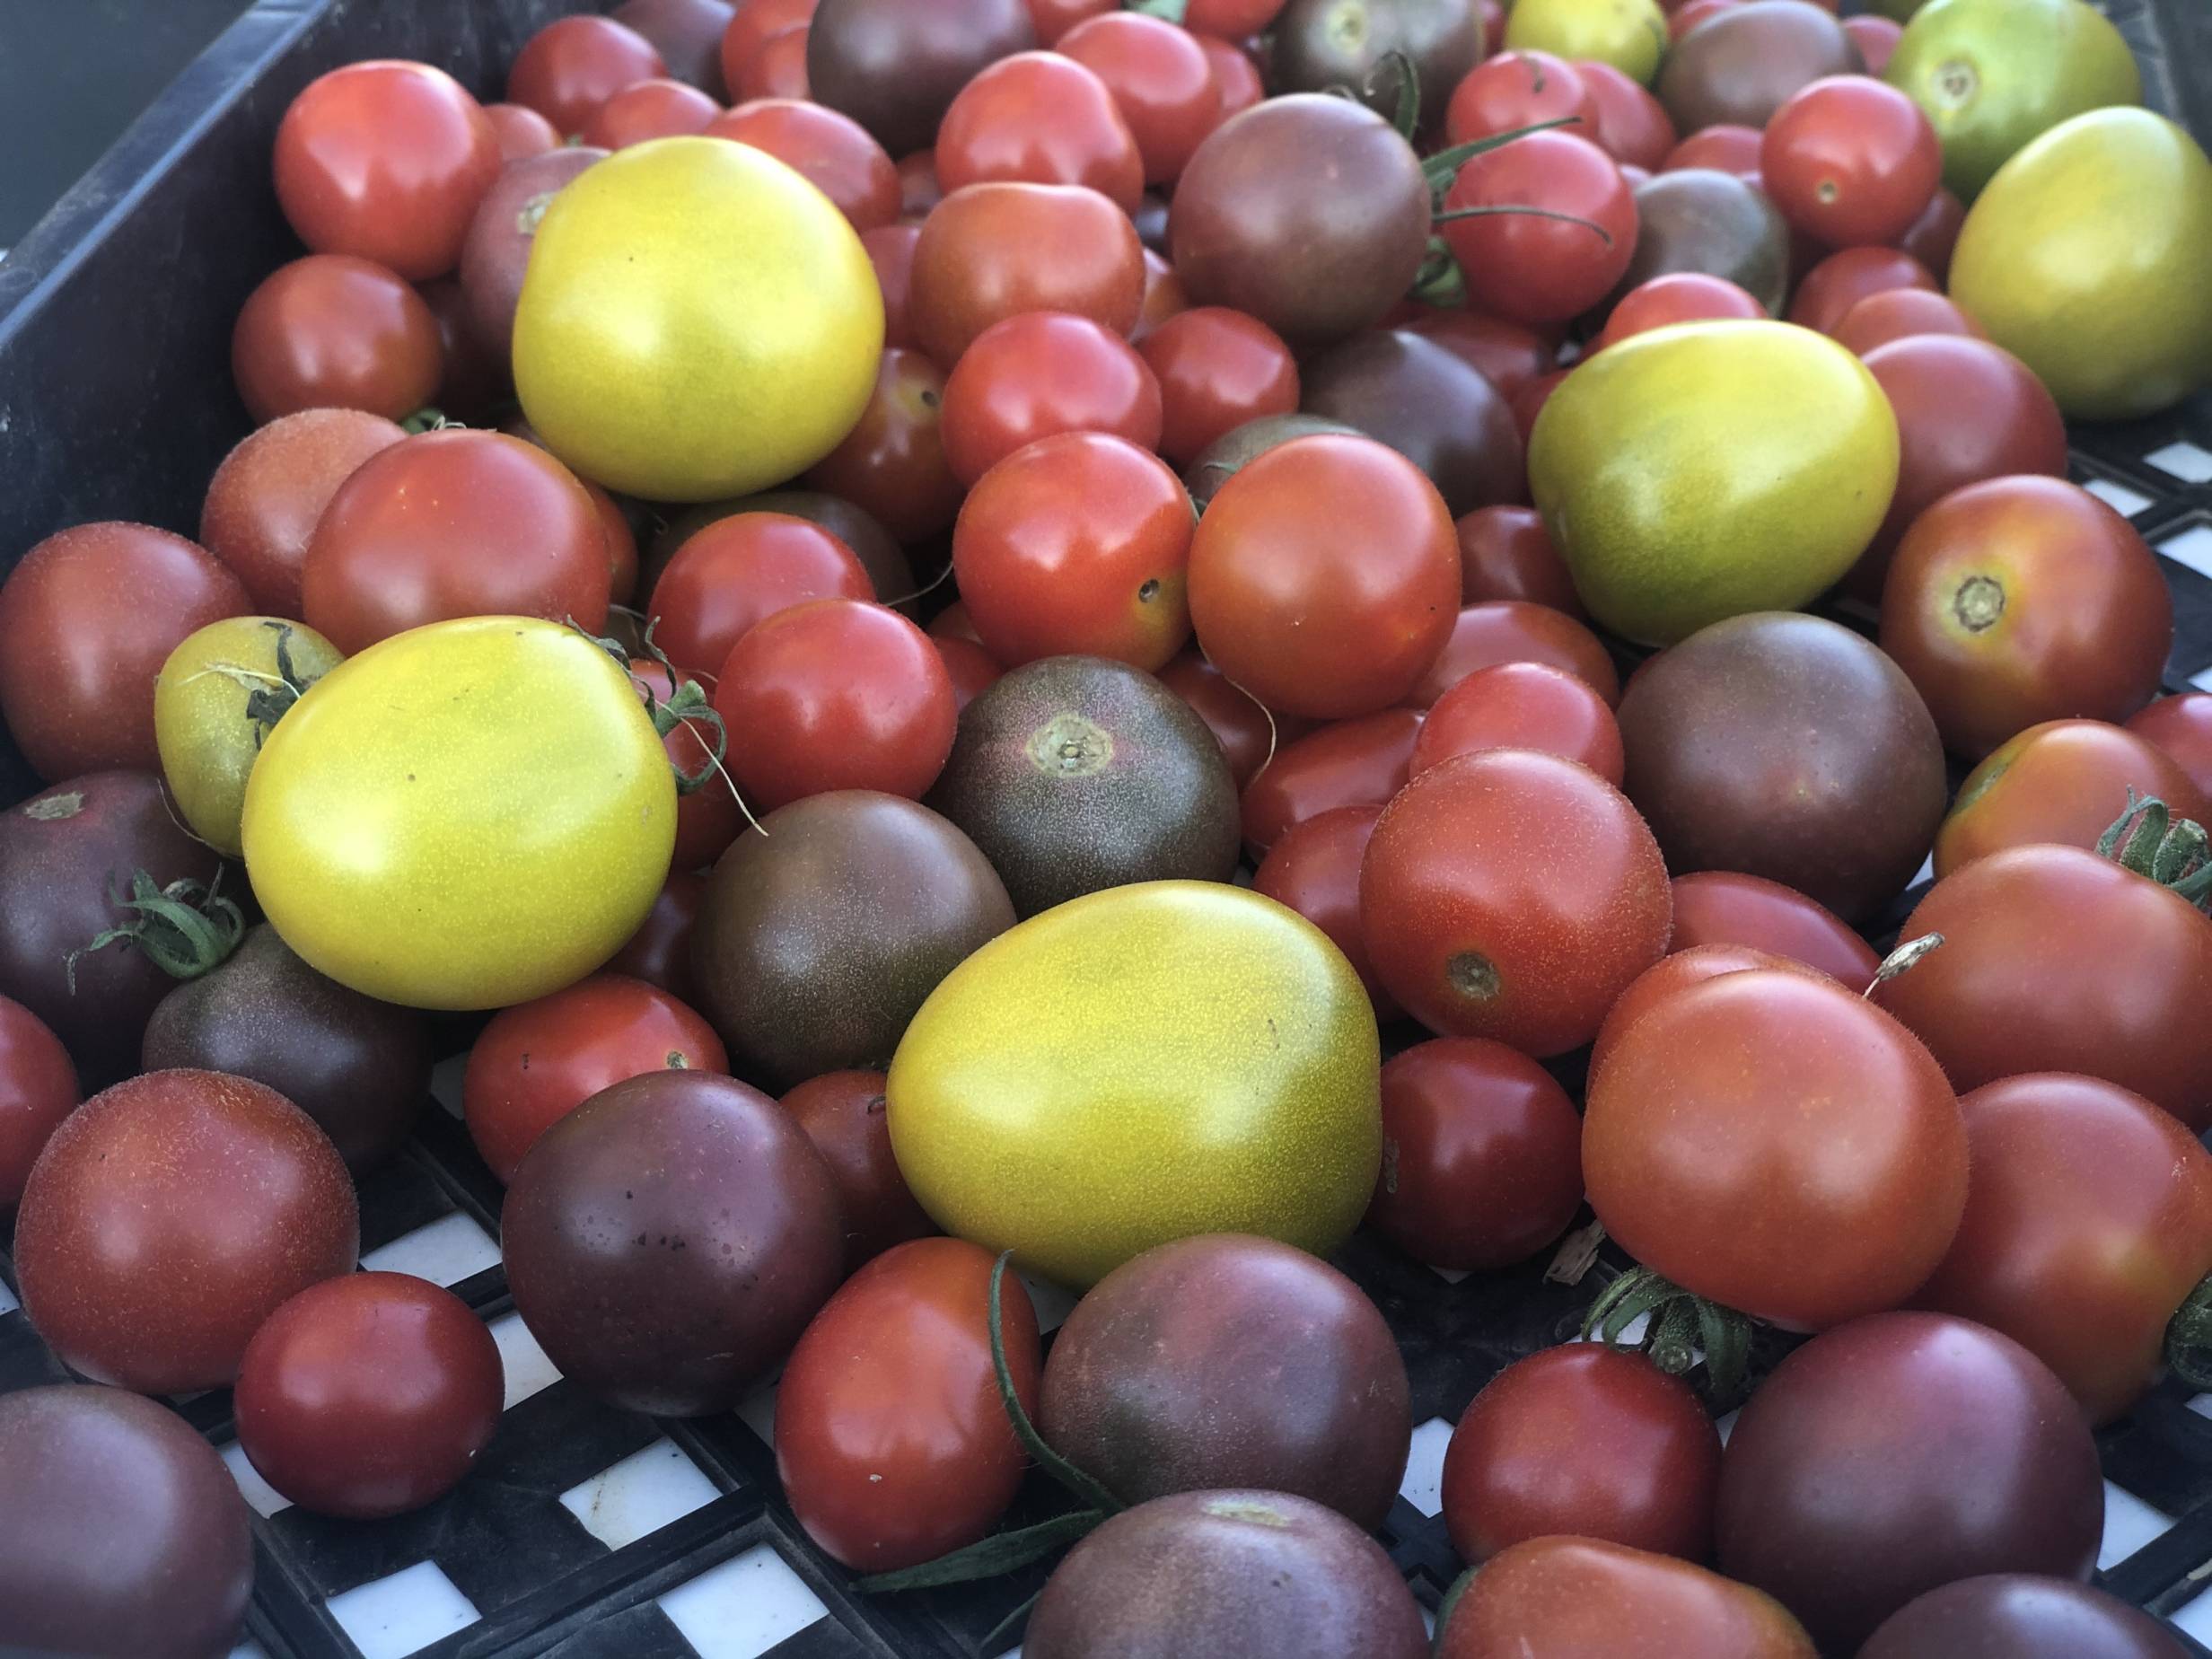 Tomatoes of varying size and in colors of orange, red, and yellow lie in a black plastic gridded container at the Urbana Market in the Square. Photo by Alyssa Buckley.